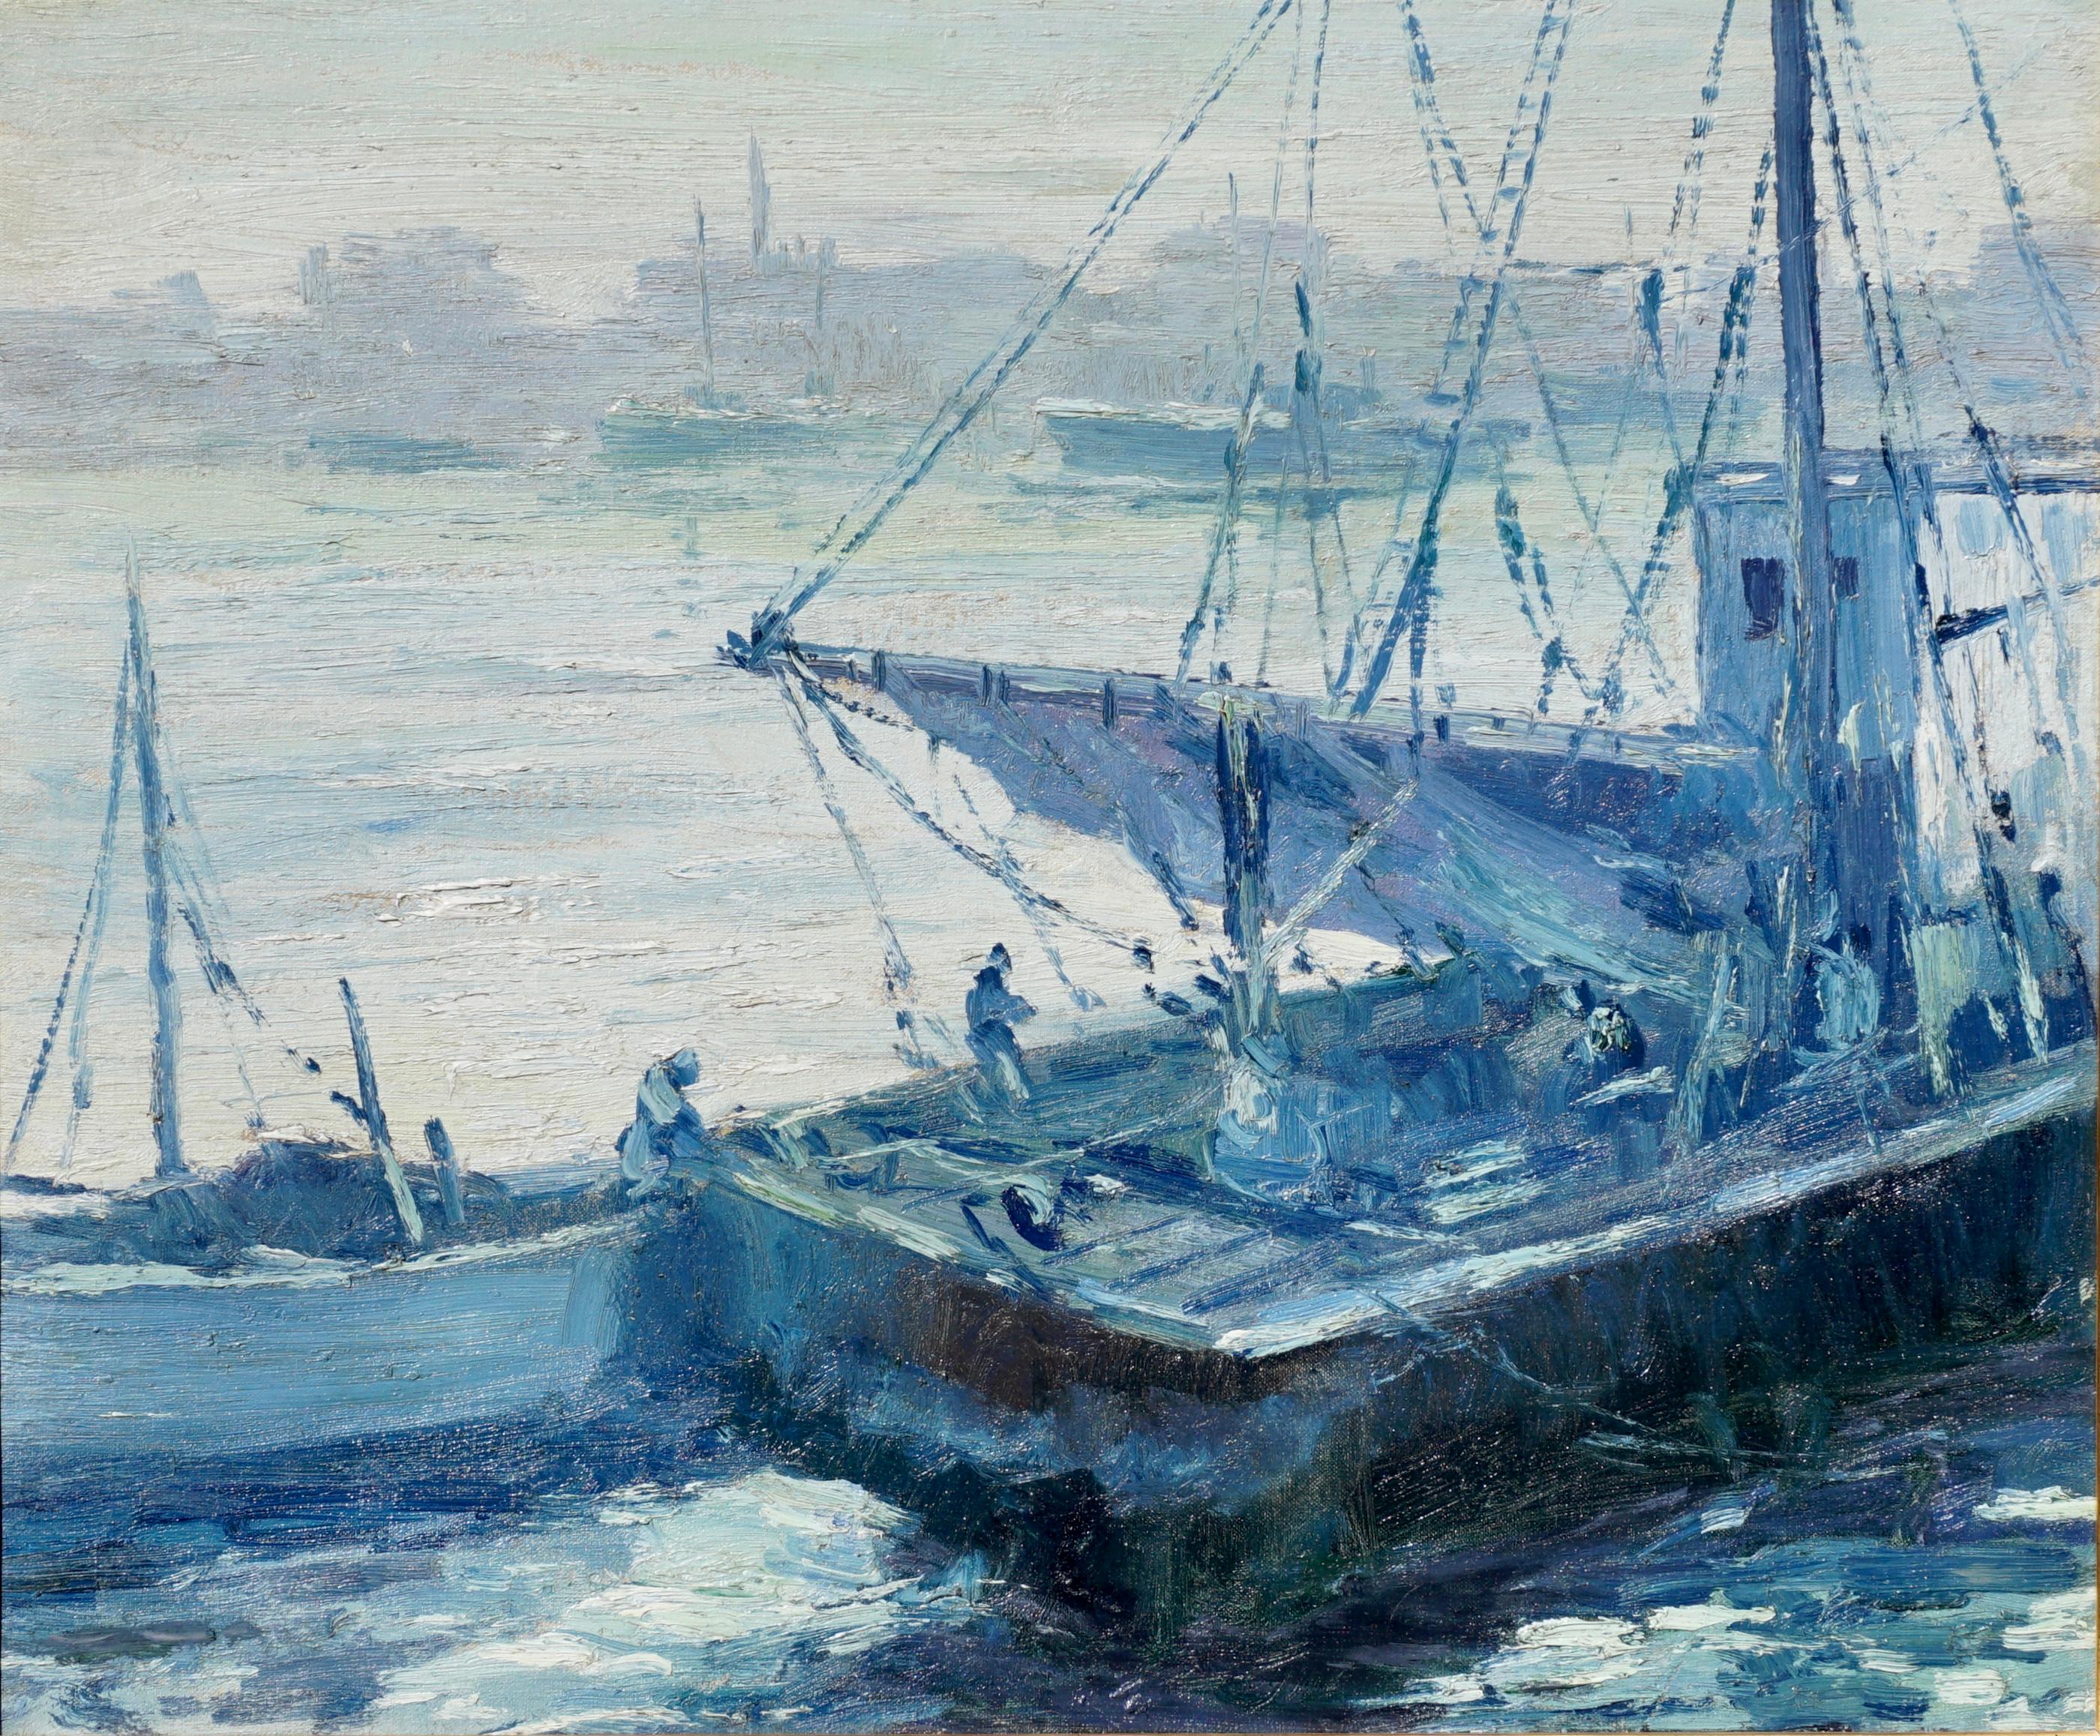 Walter Emerson Baum (Philadelphia, 1884-1956)

A harbor scene of fisherman on sailboats doing their business in the Delaware River near Philadelphia. Executed in shades of blue.

Singed and inscribed on verso “Presented by W.E.BAUM to M. Stark /